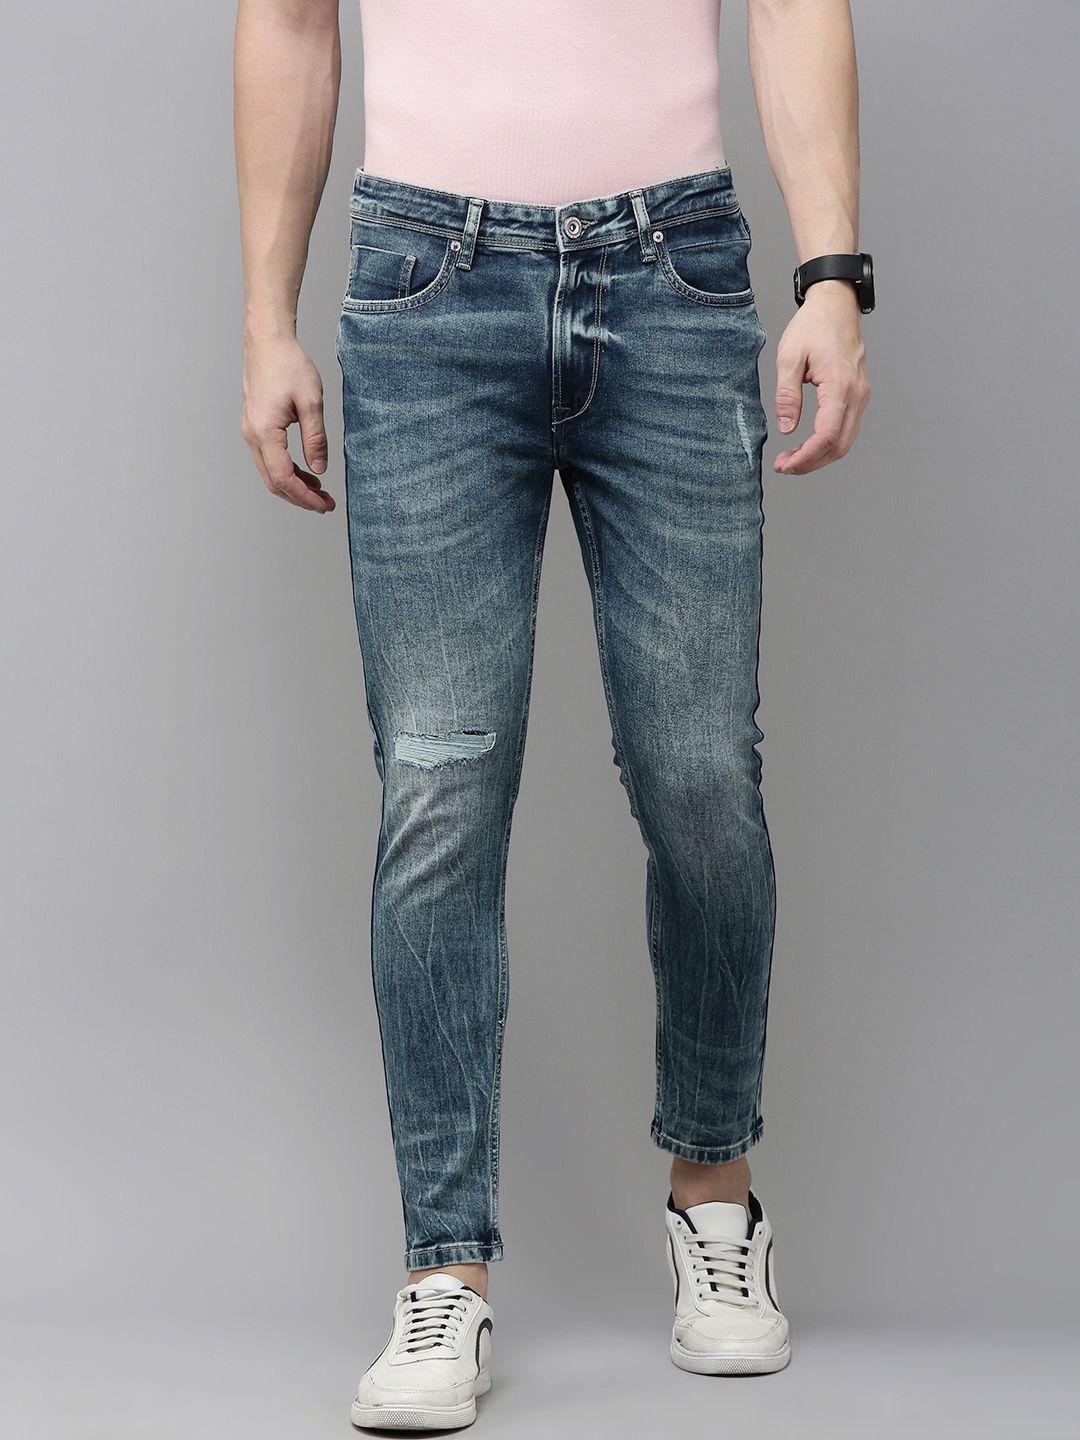 beat london by pepe jeans men super skinny fit mildly distressed stretchable jeans